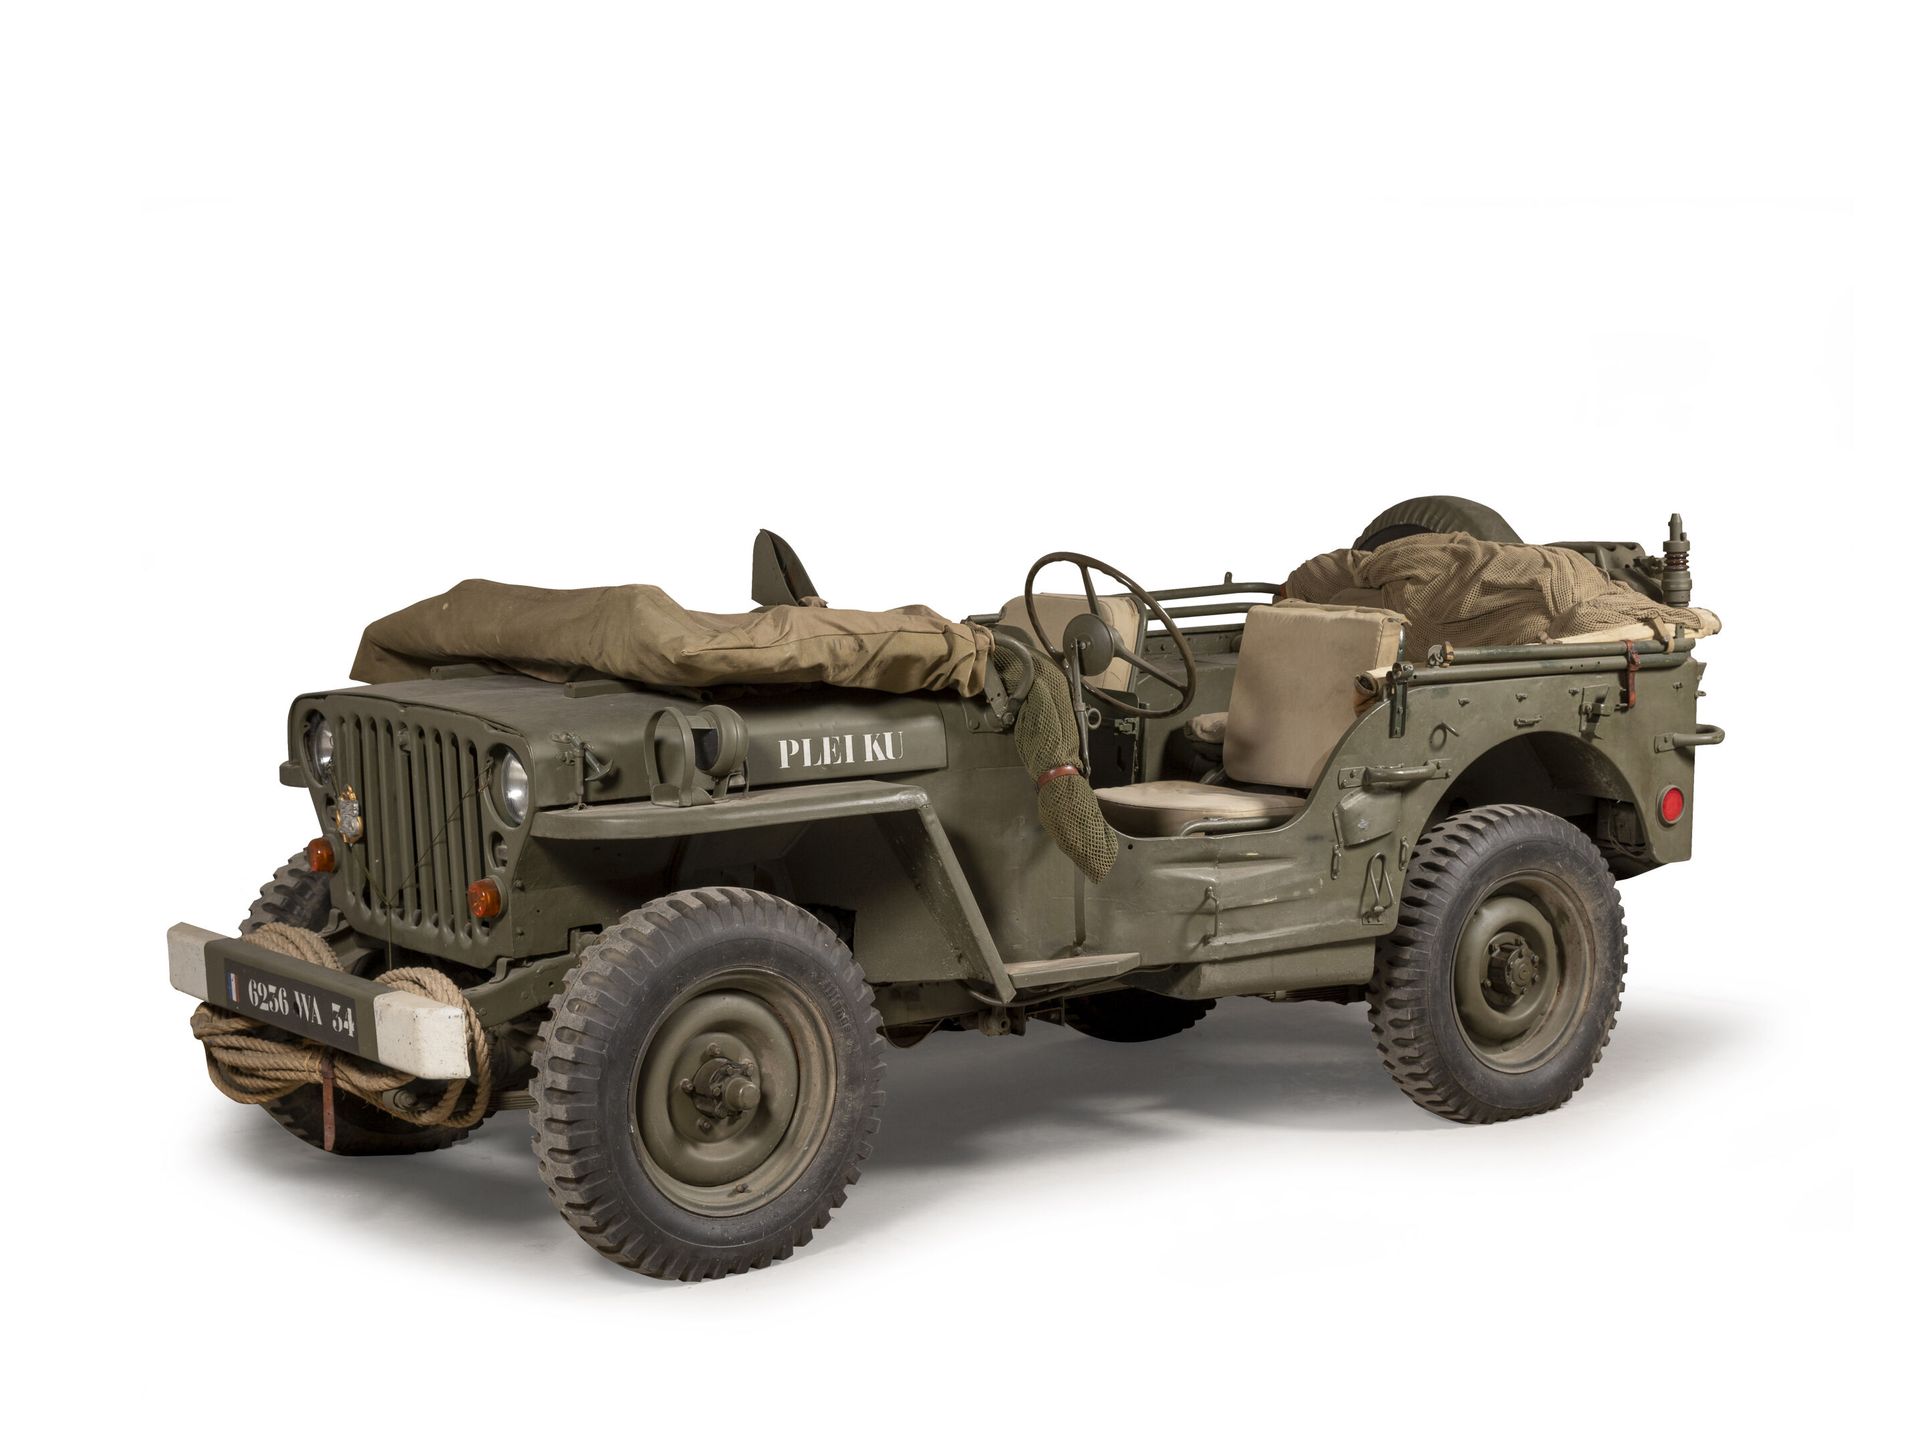 JEEP Willys MB Restored vehicle in a French Army in Indochina configuration.

Pl&hellip;